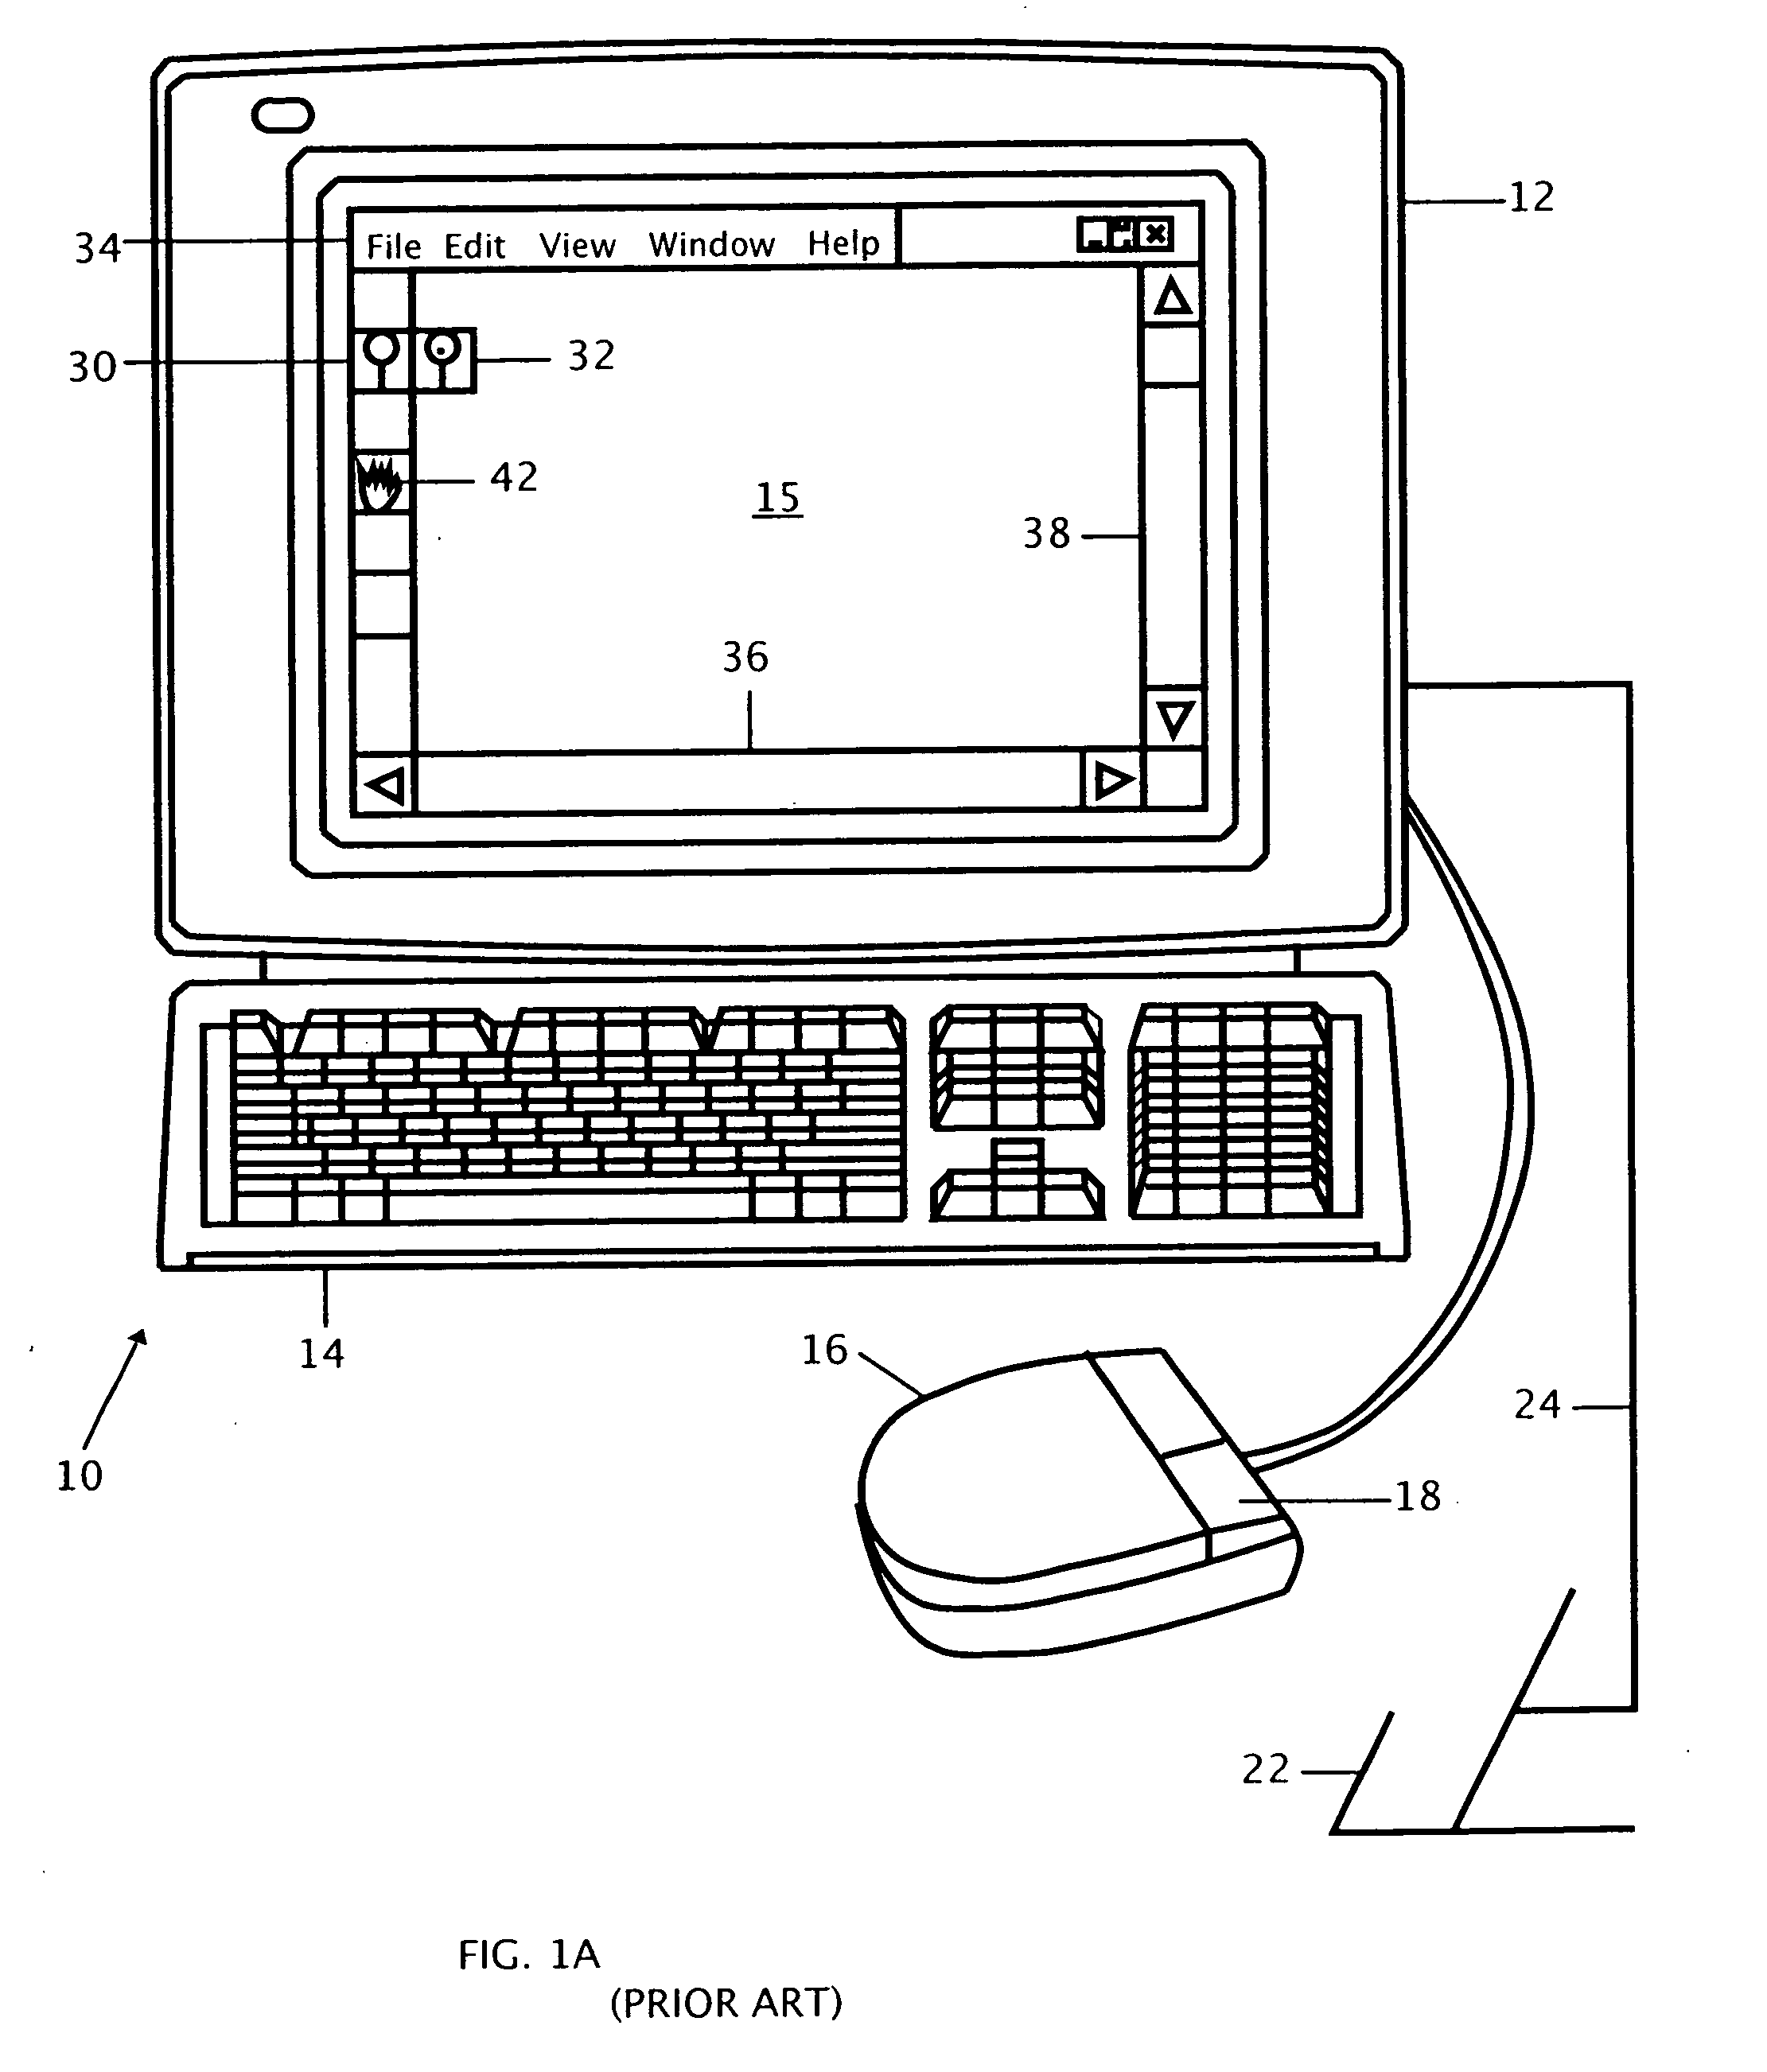 System and method for wireless network content conversion for intuitively controlled portable displays